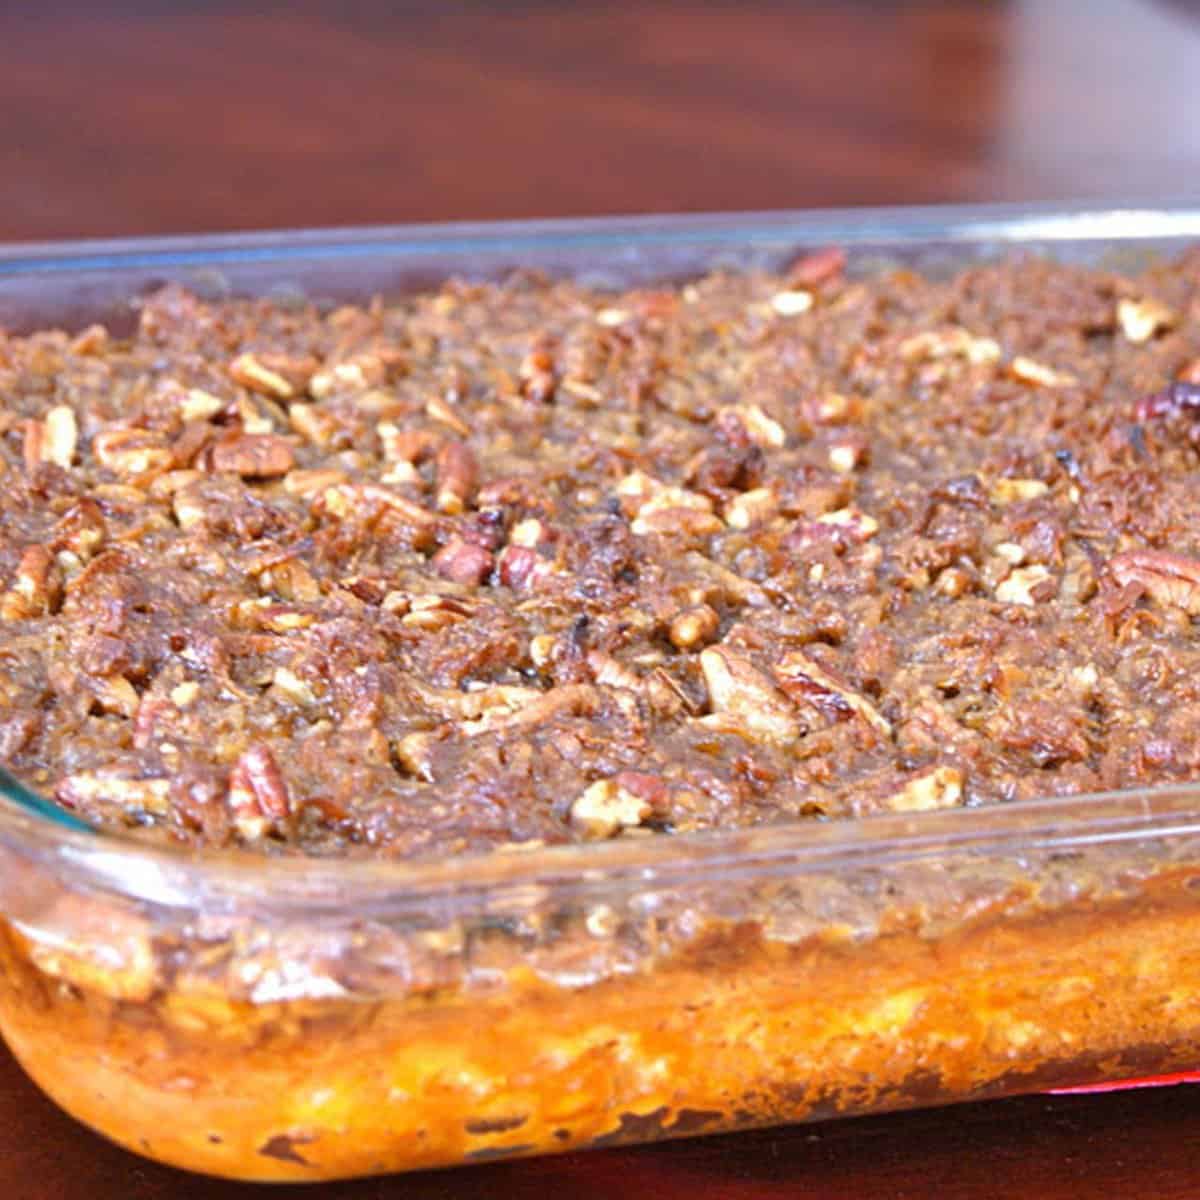 Indulge in Mary’s Sweet Potato Delight Recipe Today!